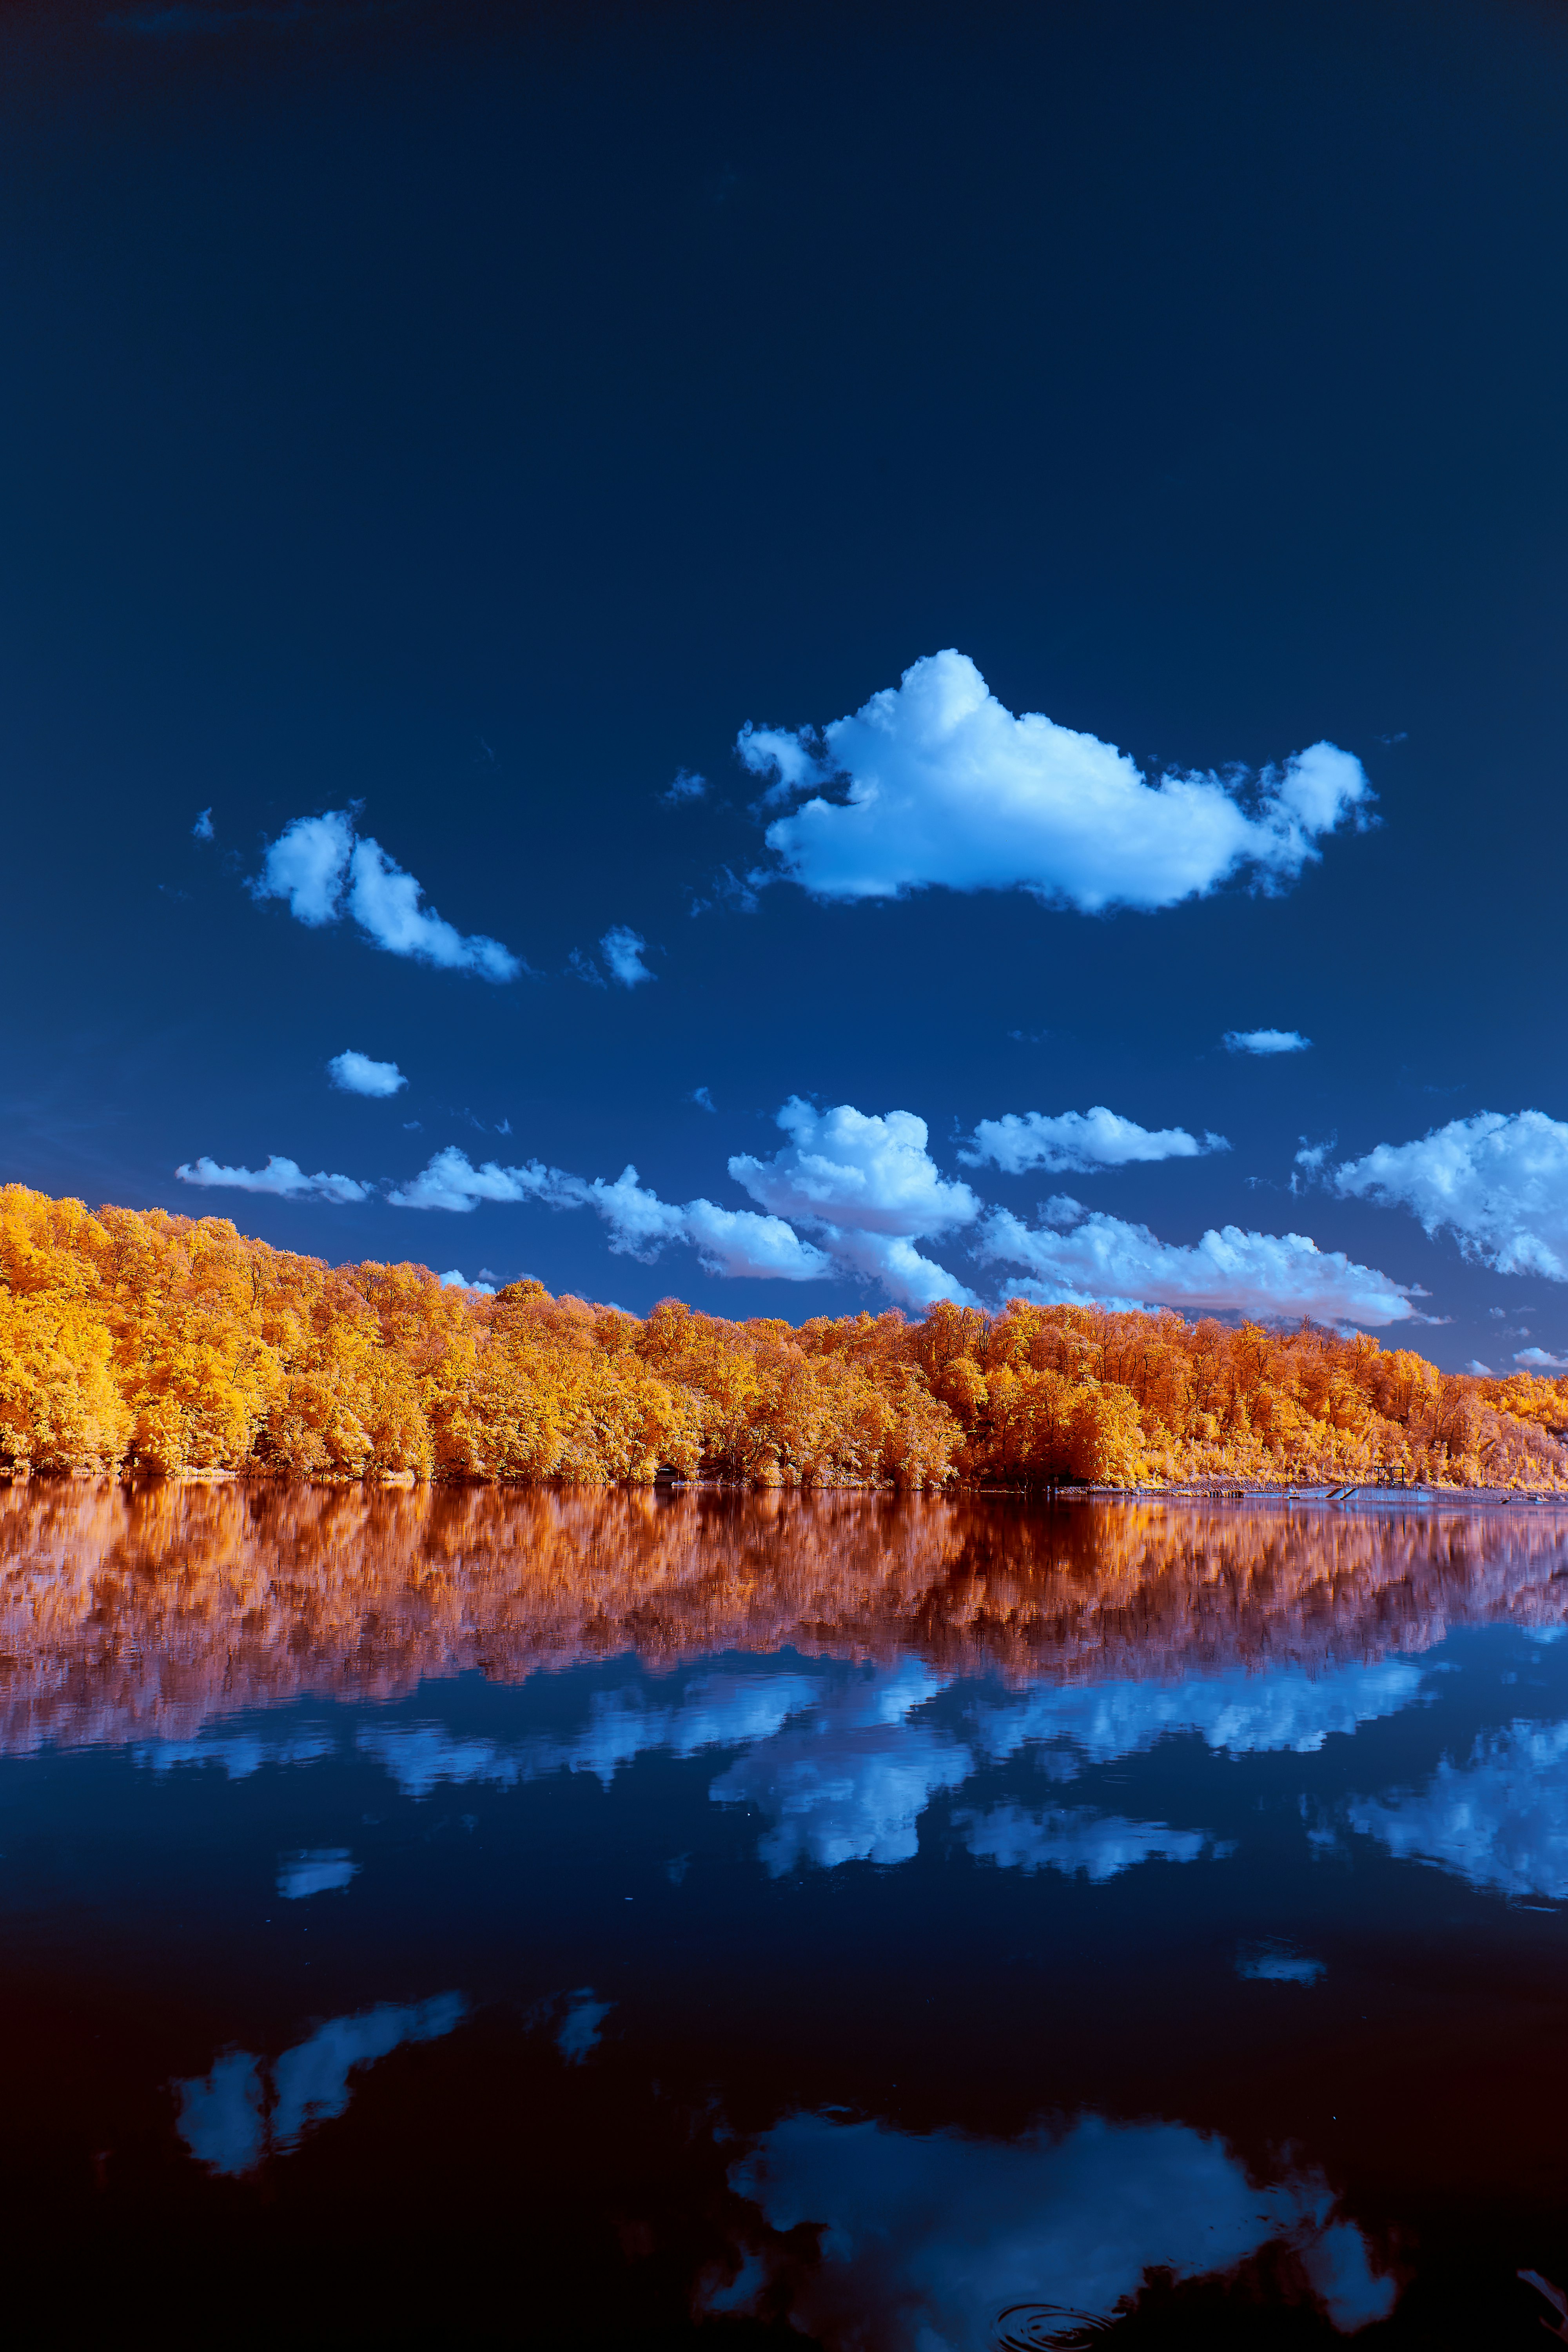 body of water near brown trees under blue sky during daytime